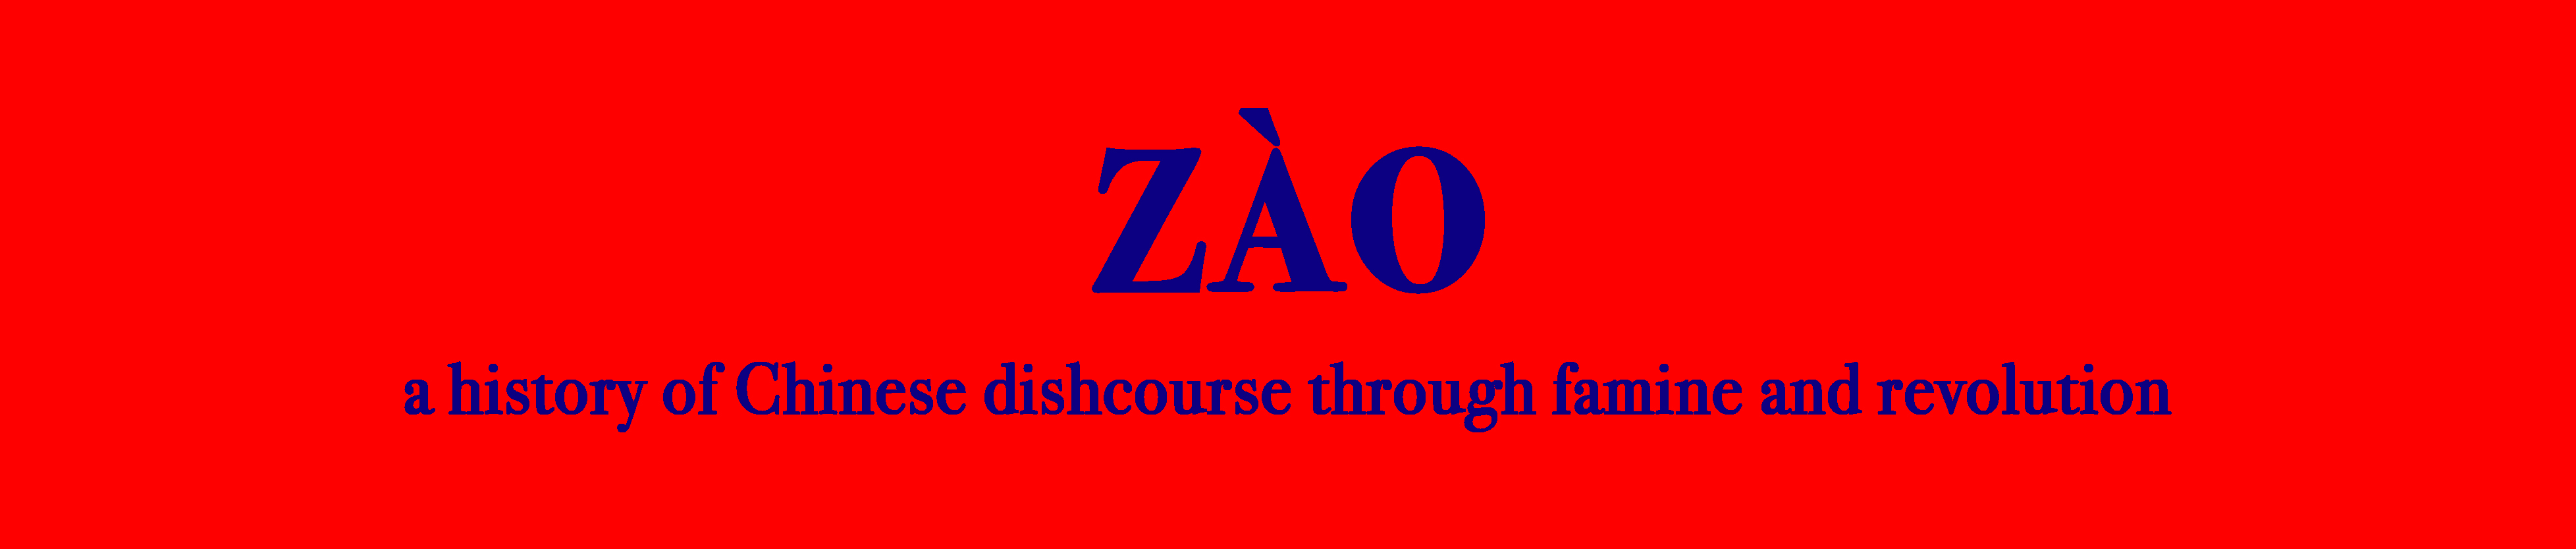 ZÀO: A History of Chinese Dishcourse through Famine and Revolution — Prologue